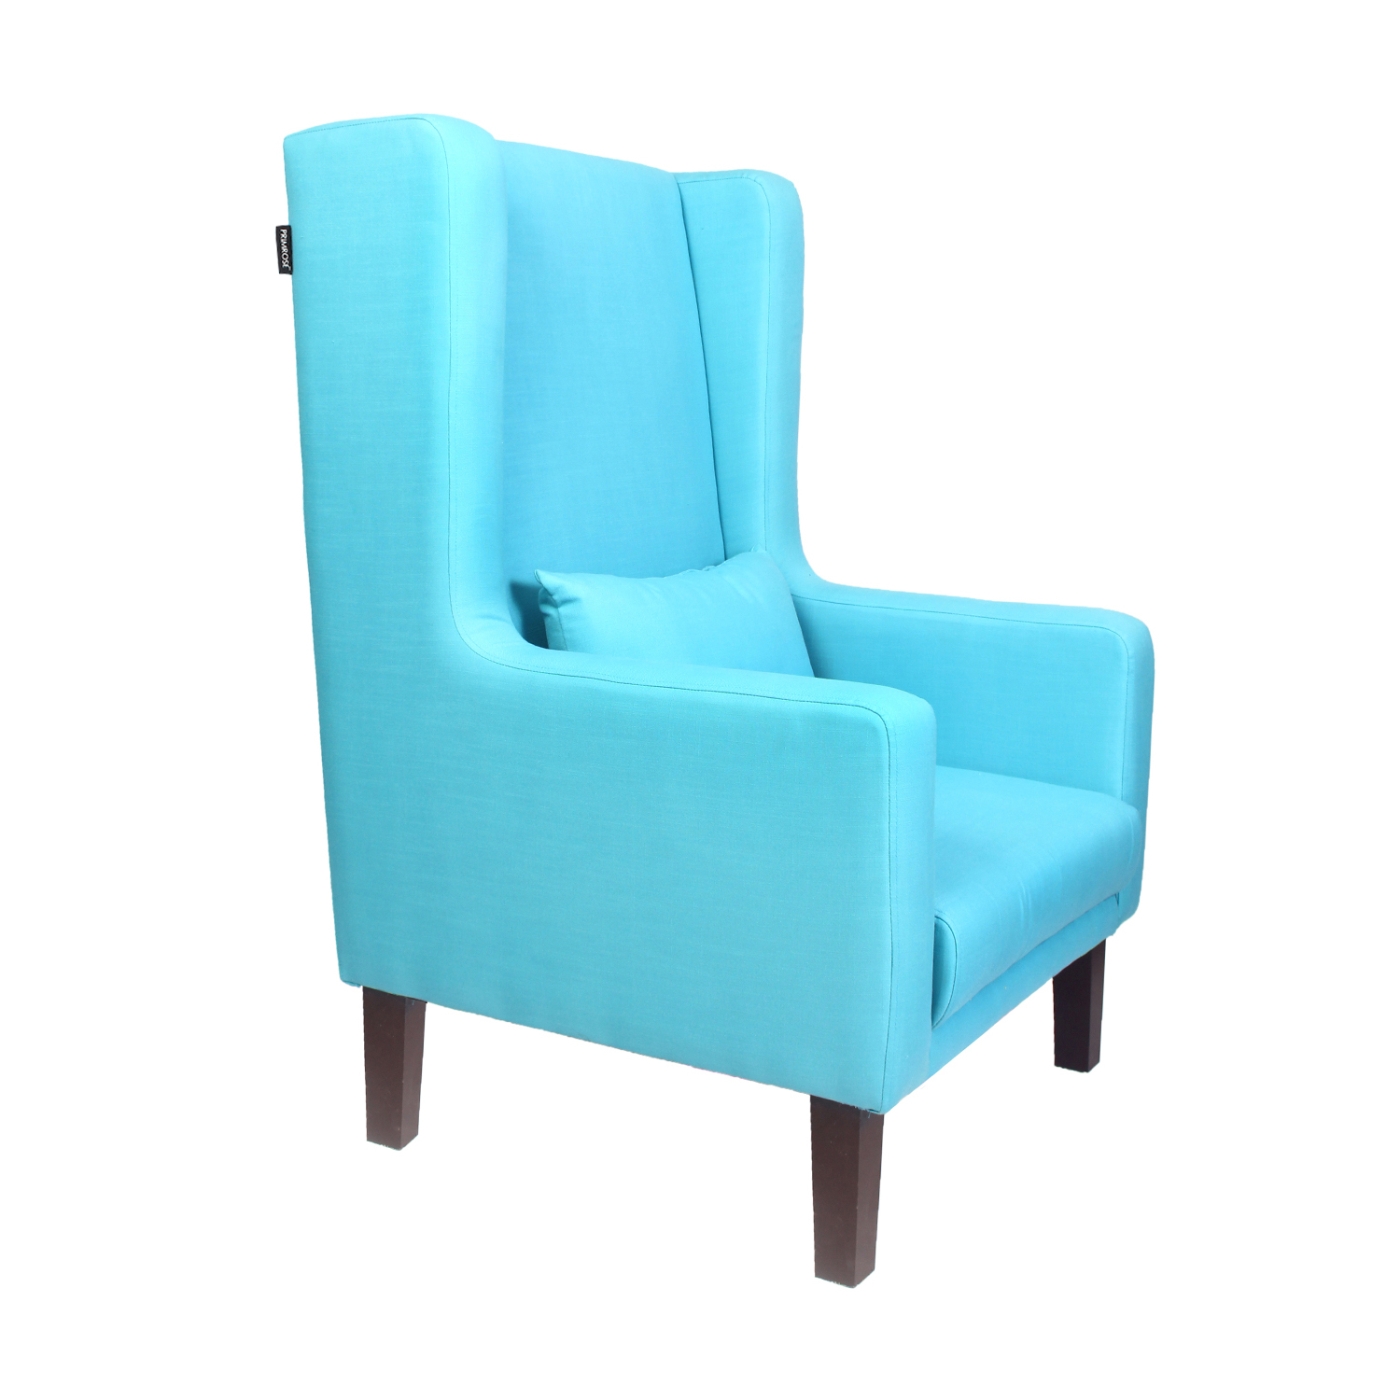 PRIMROSE Chicago High Back Polyester Fabric Chair - Light Blue  